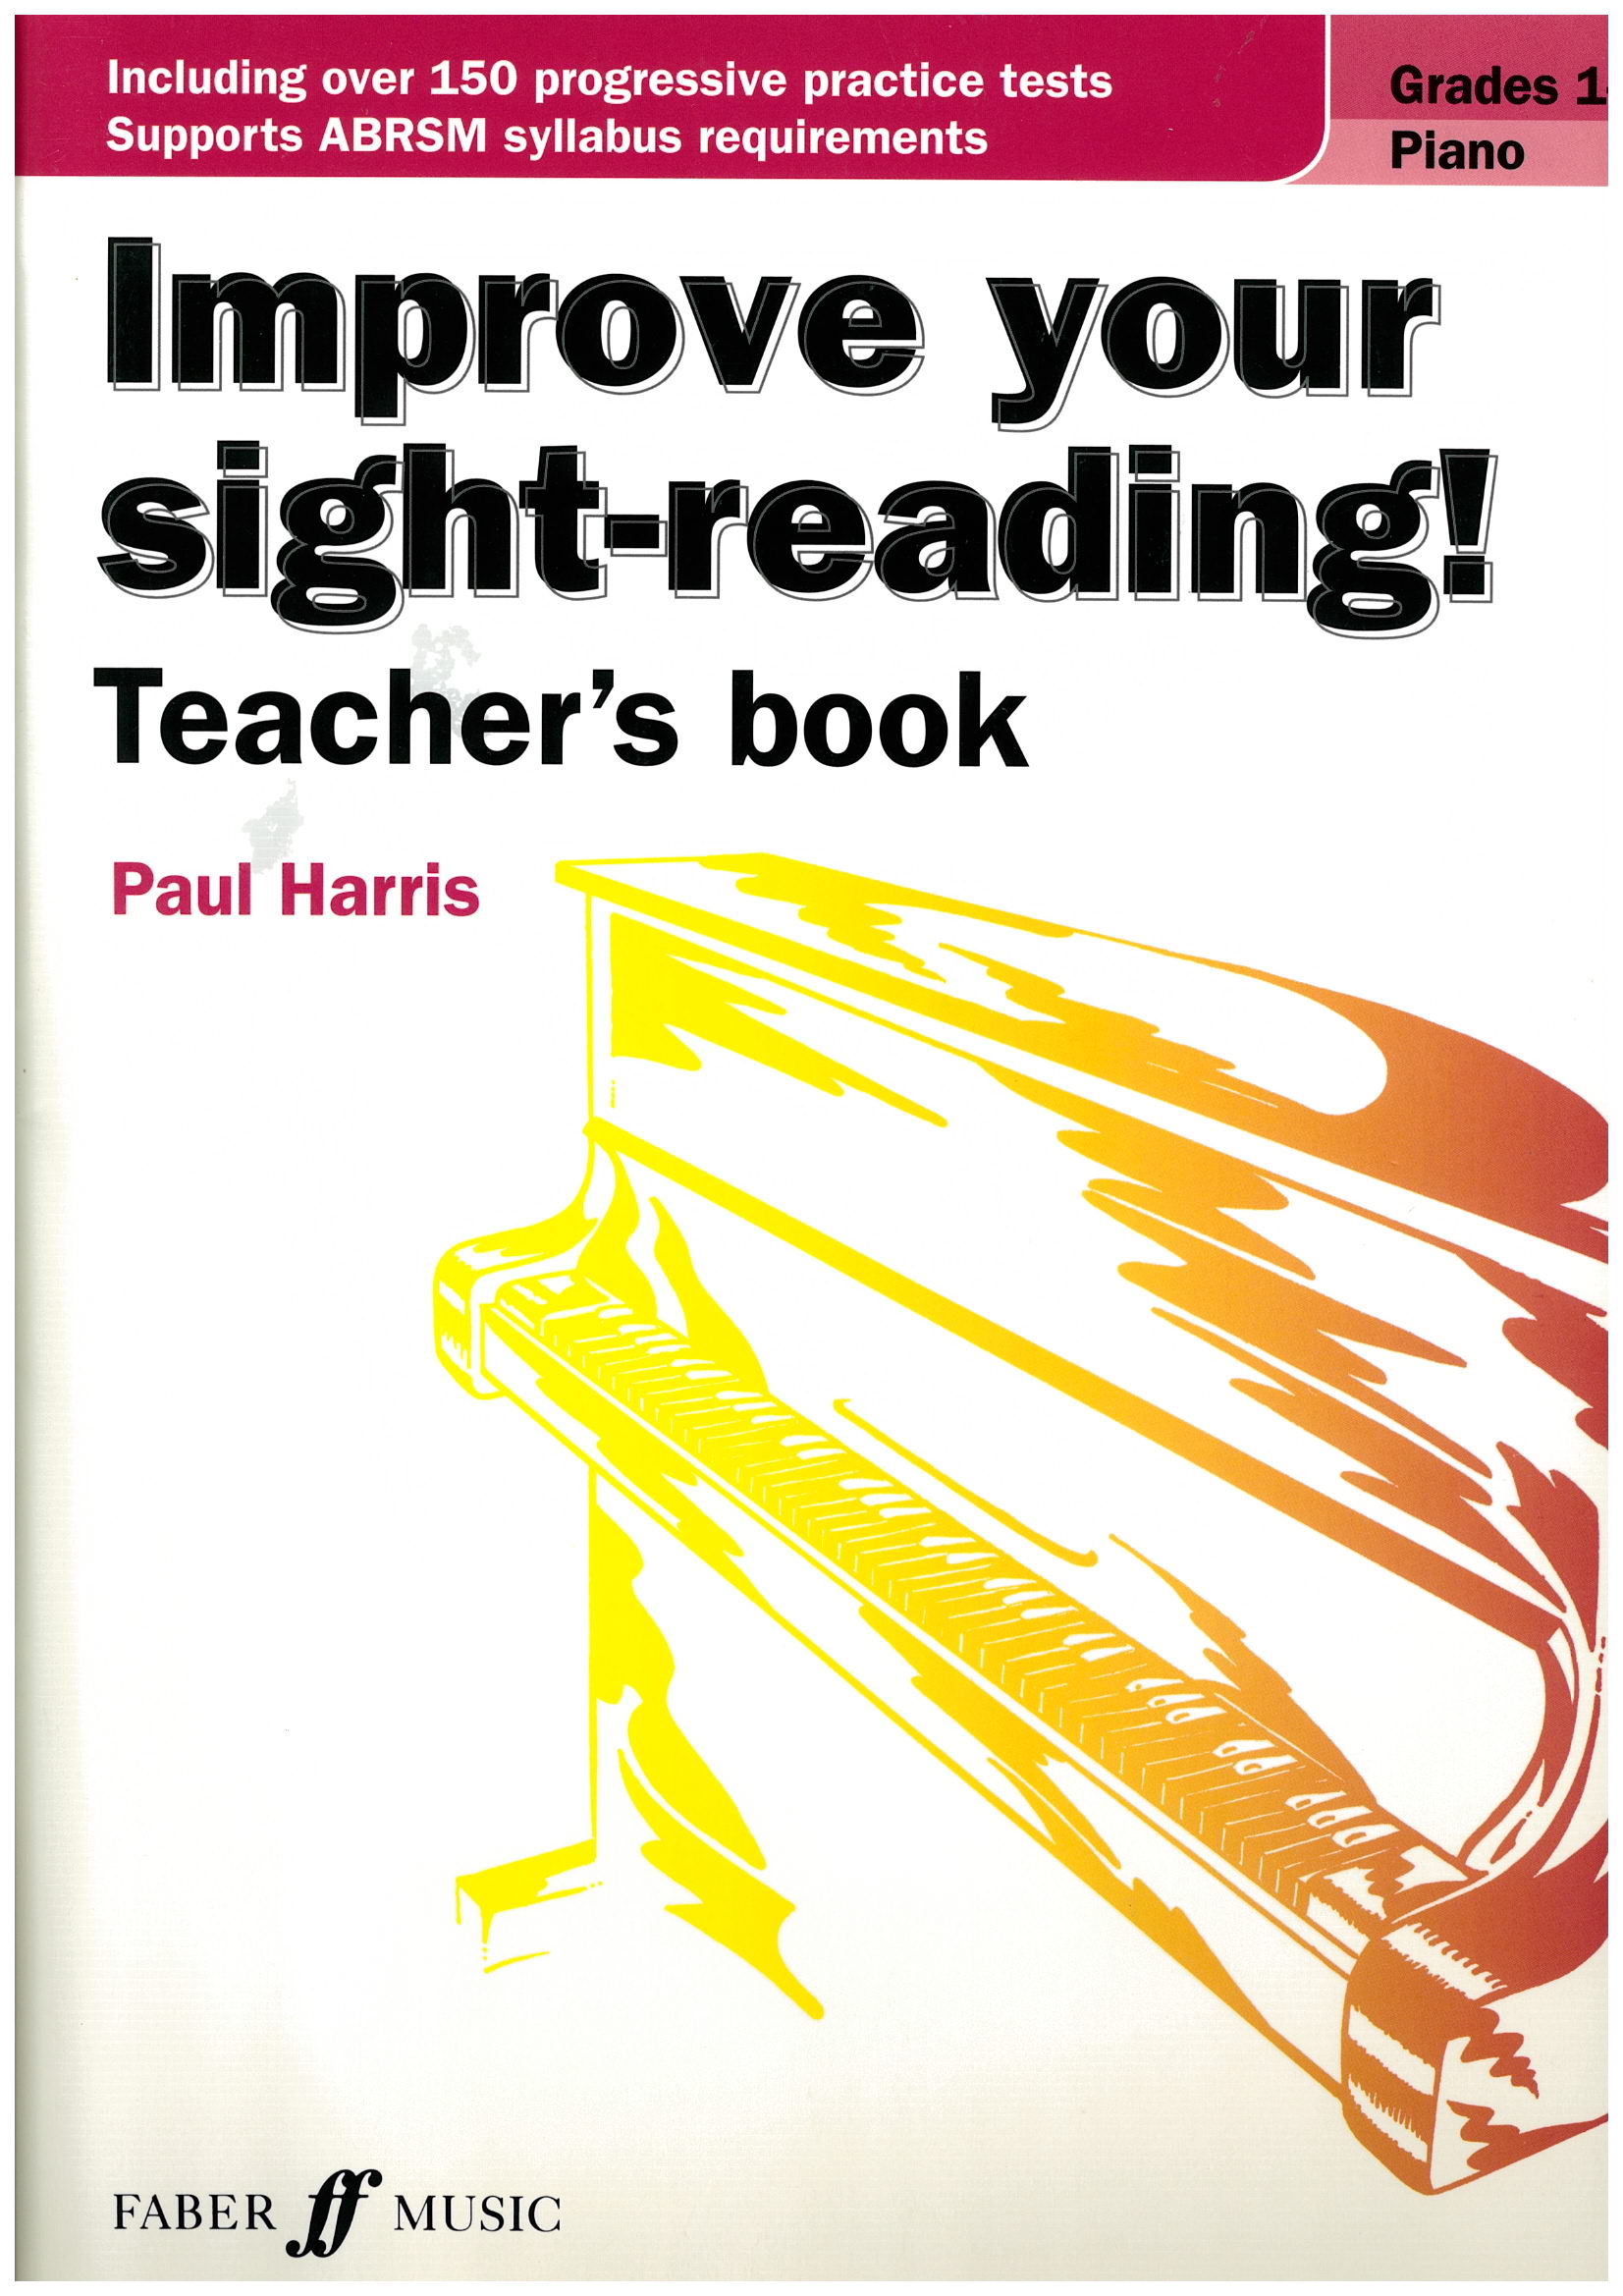 Improve your sight-reading for Piano G1-5: Teacher's book